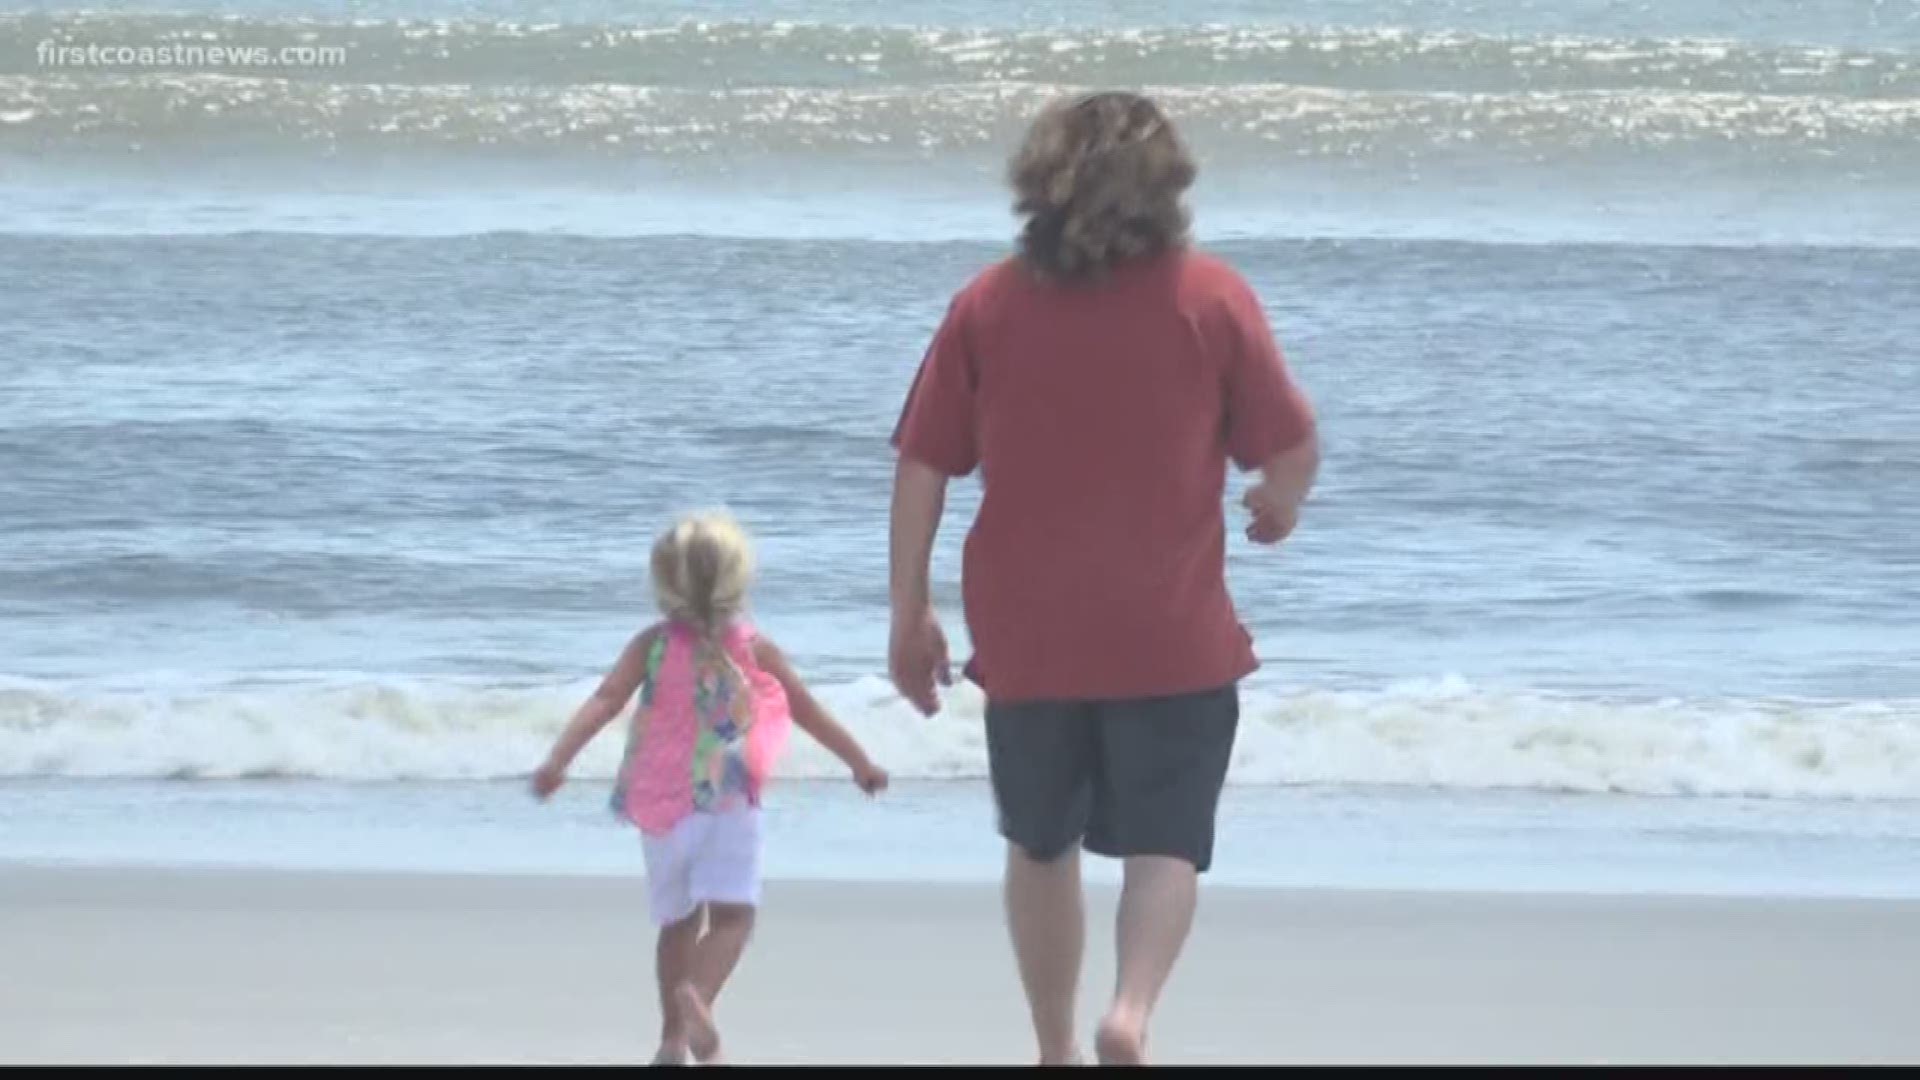 An Atlantic Beach man is looking for the surfers he says saved his and his granddaughter?s lives by pulling them from a riptide.